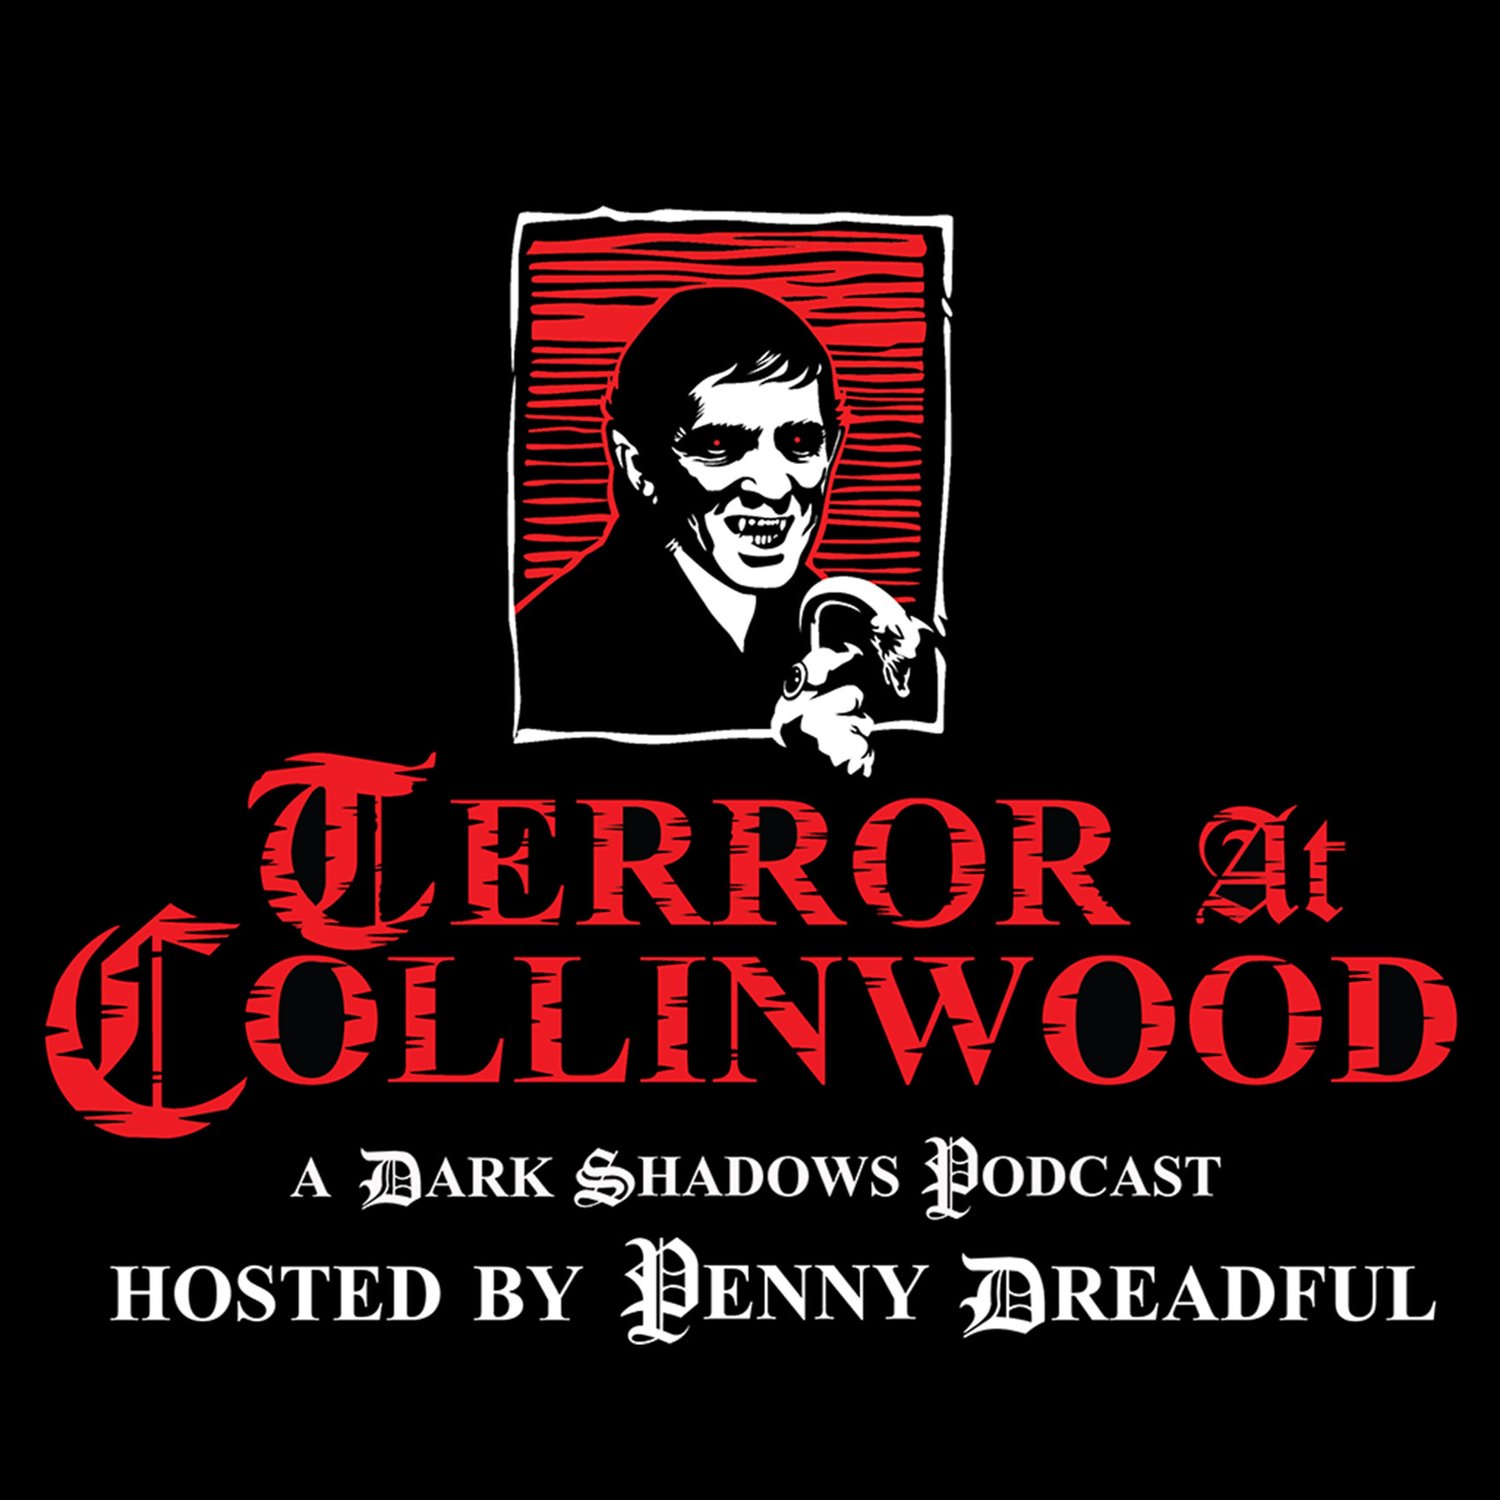 Terror at Collinwood Episode 73: Collinsport After Dark with Alan Gallant